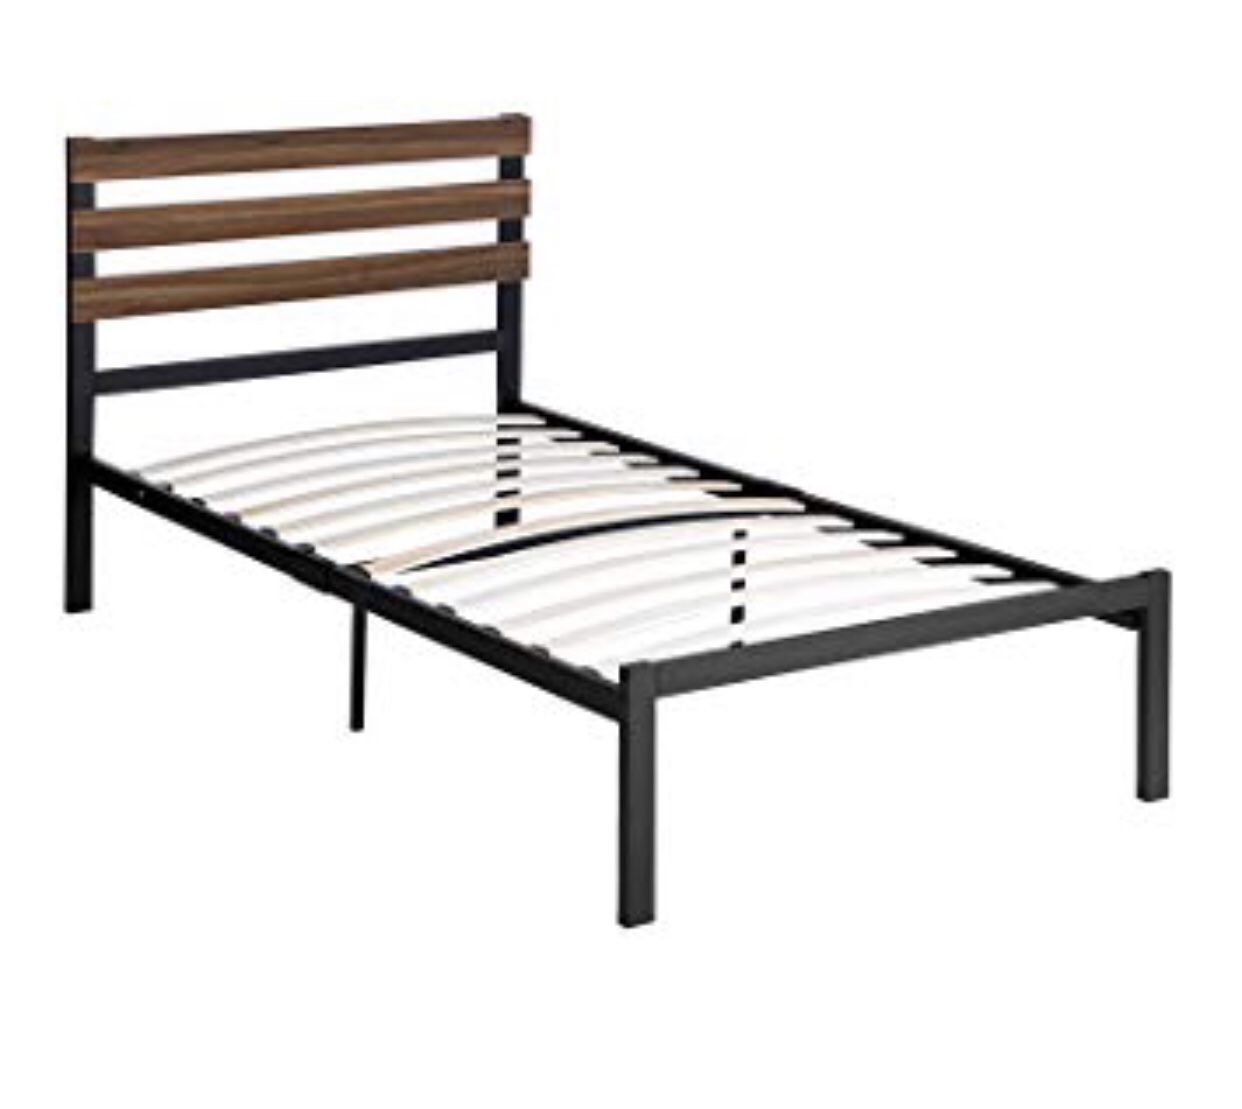 New in a box TWIN platform bed frame